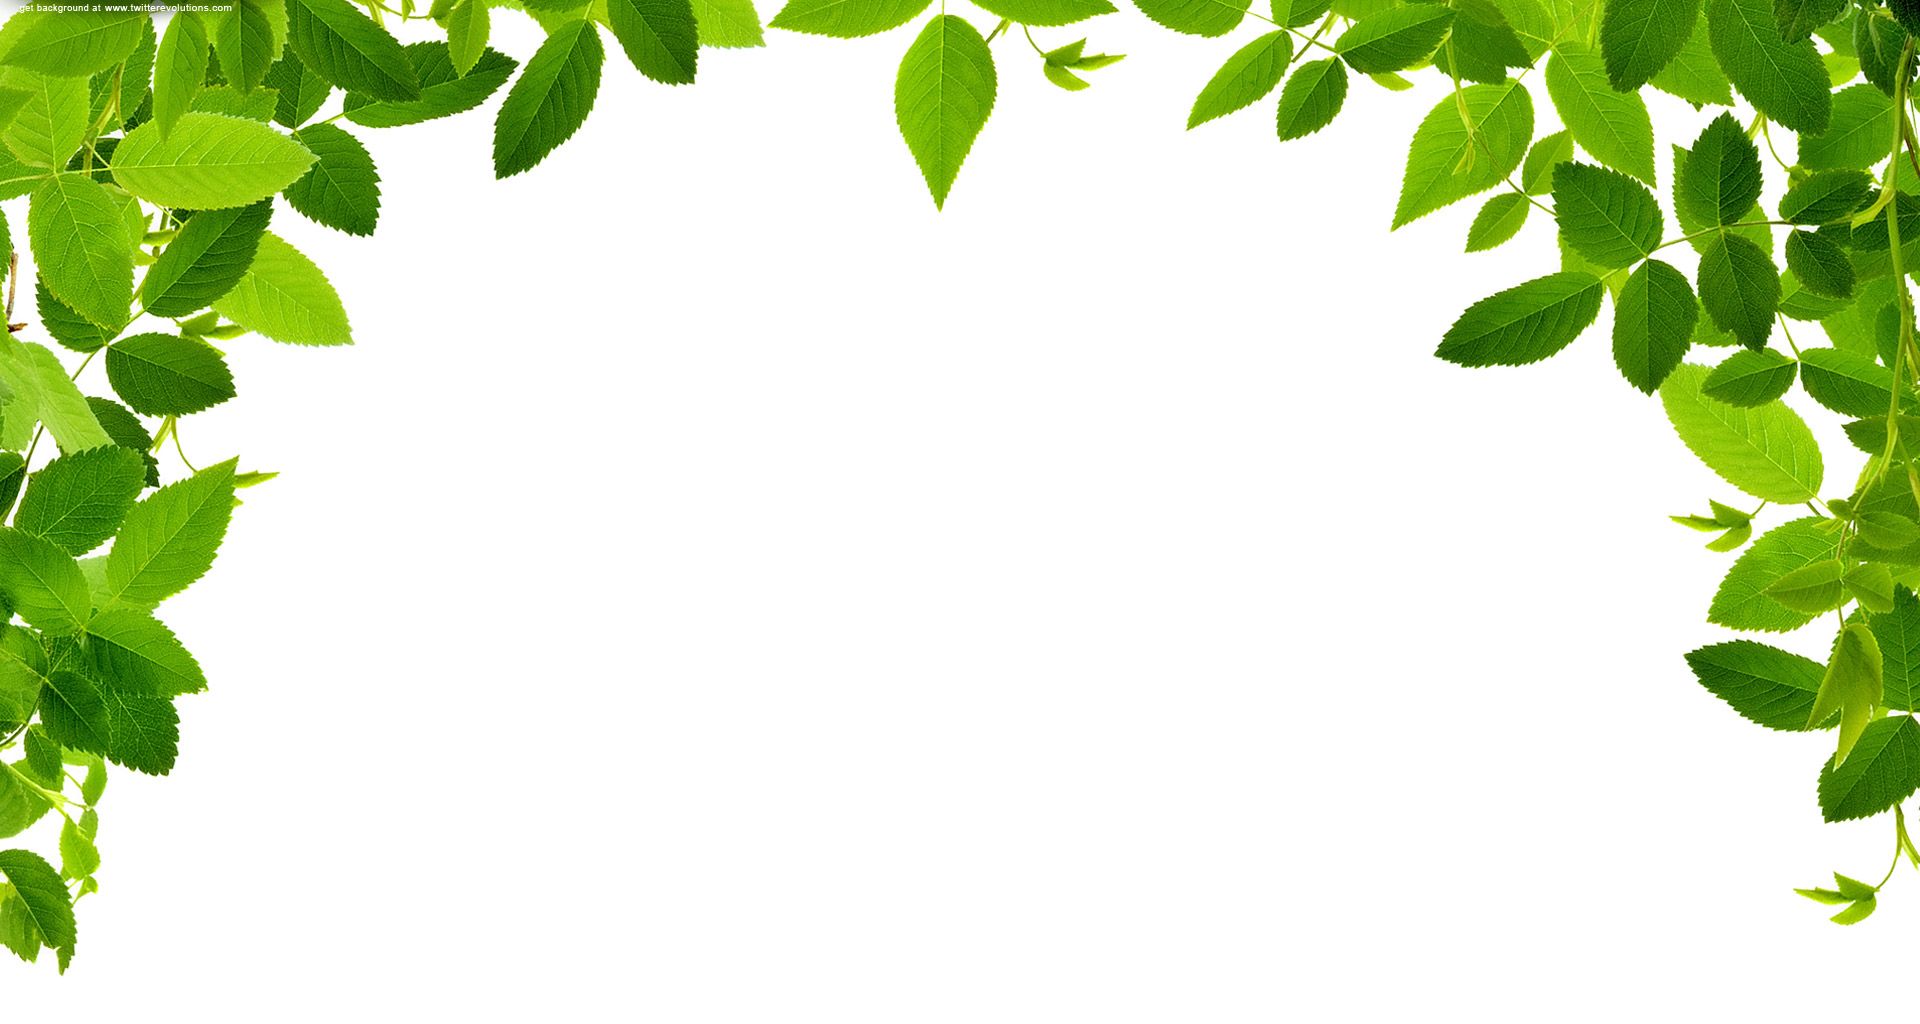 Leaves clipart real leaf. Free images at clker